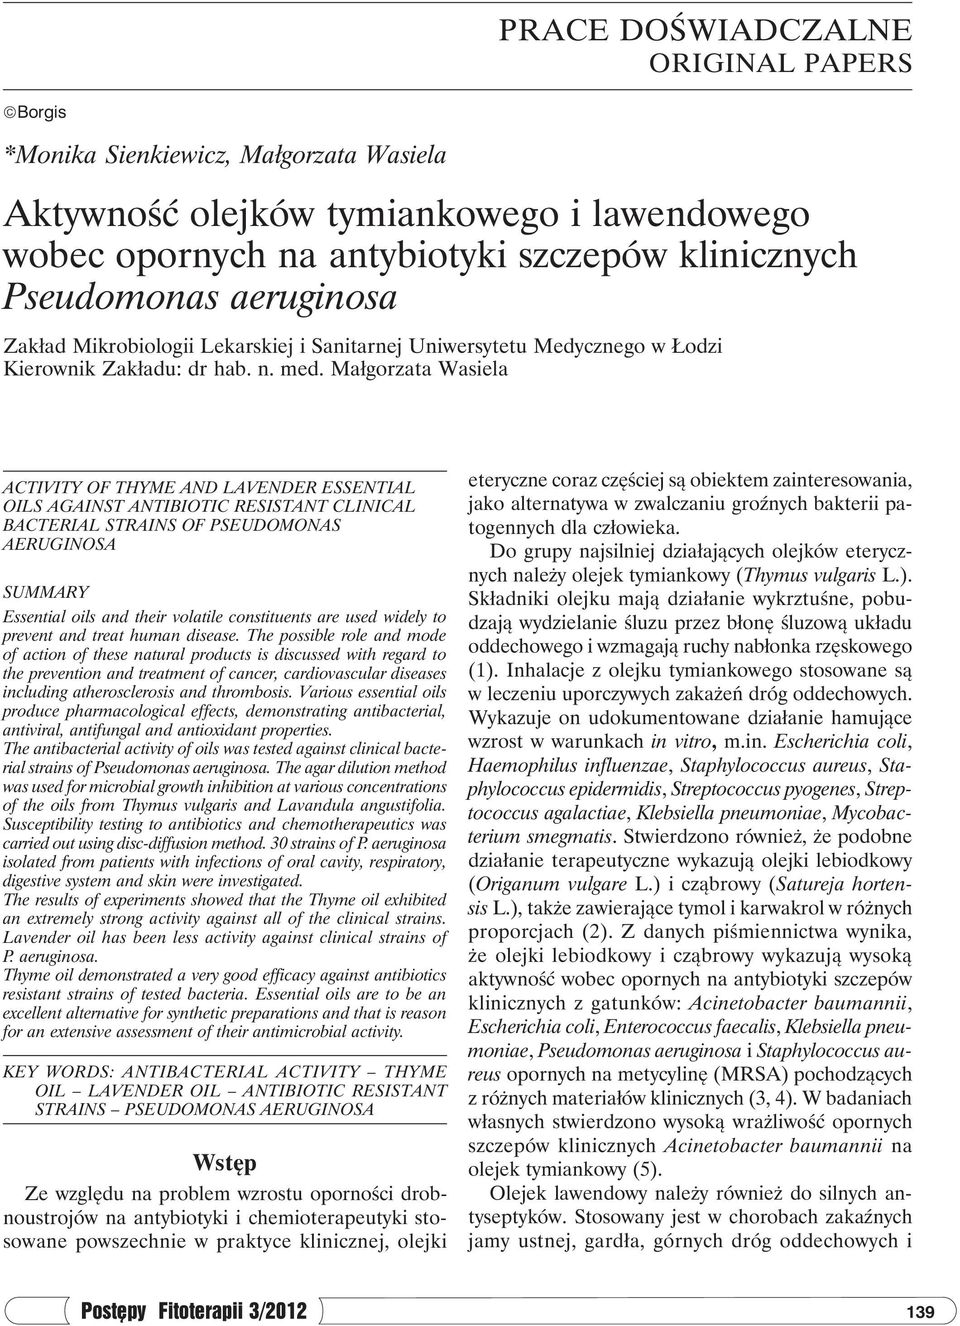 Małgorzata Wasiela ACTIVITY OF THYME AND LAVENDER ESSENTIAL OILS AGAINST ANTIBIOTIC RESISTANT CLINICAL BACTERIAL STRAINS OF PSEUDOMONAS AERUGINOSA SUMMARY Essential oils and their volatile